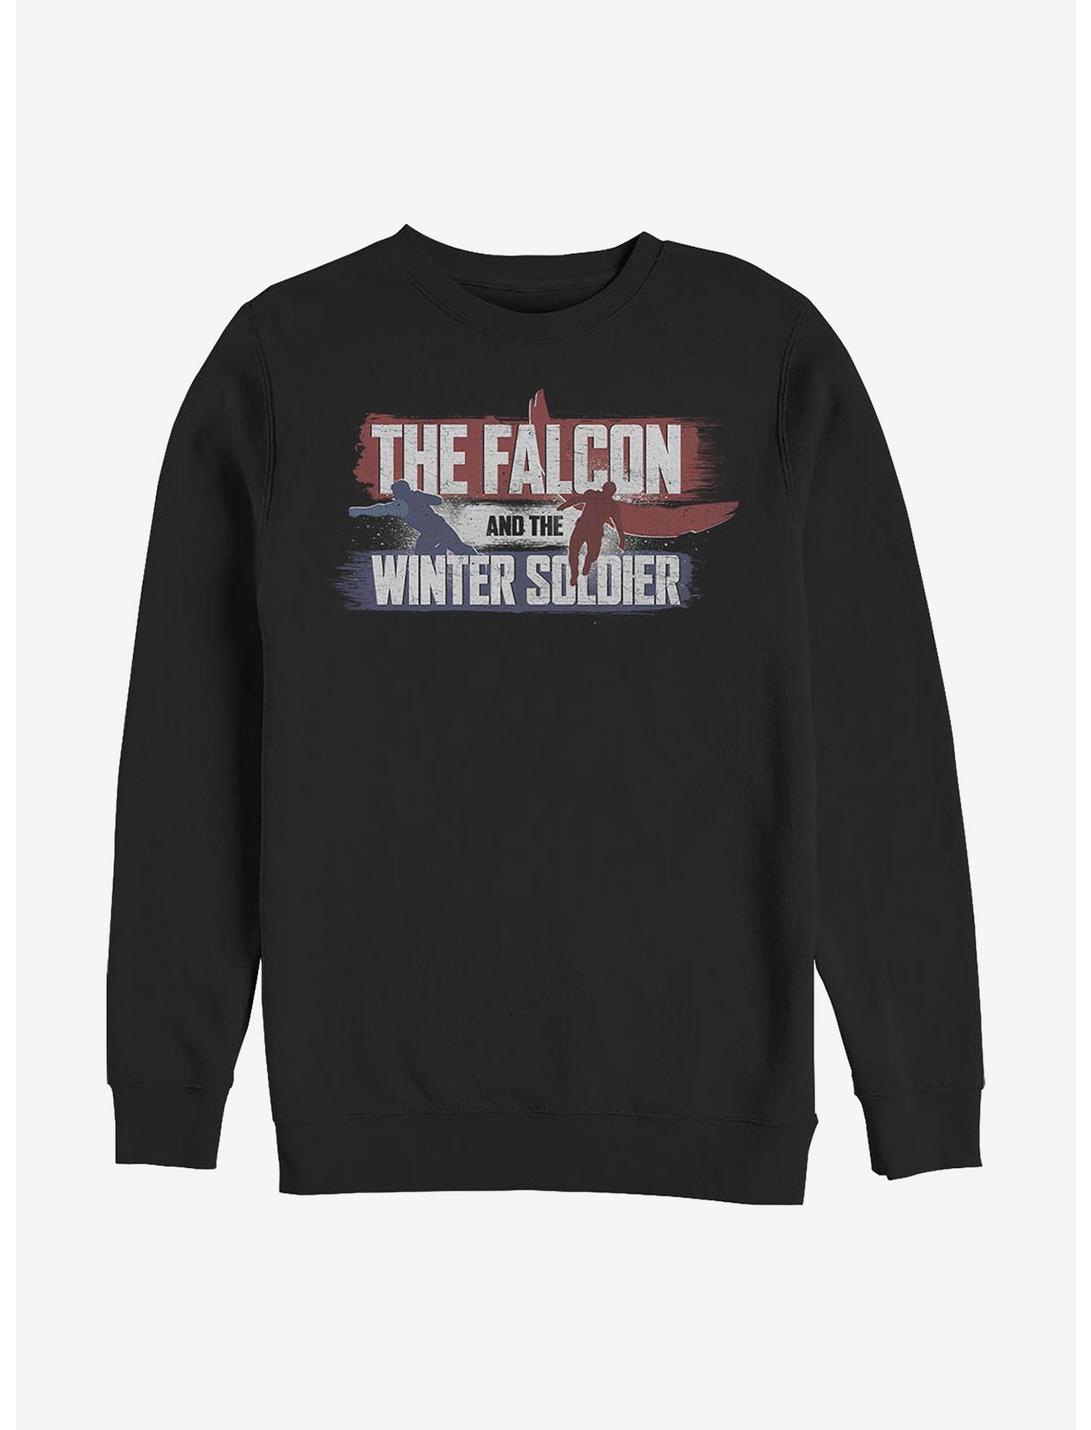 Marvel The Falcon And The Winter Soldier Spray Paint Logo Crew Sweatshirt, BLACK, hi-res